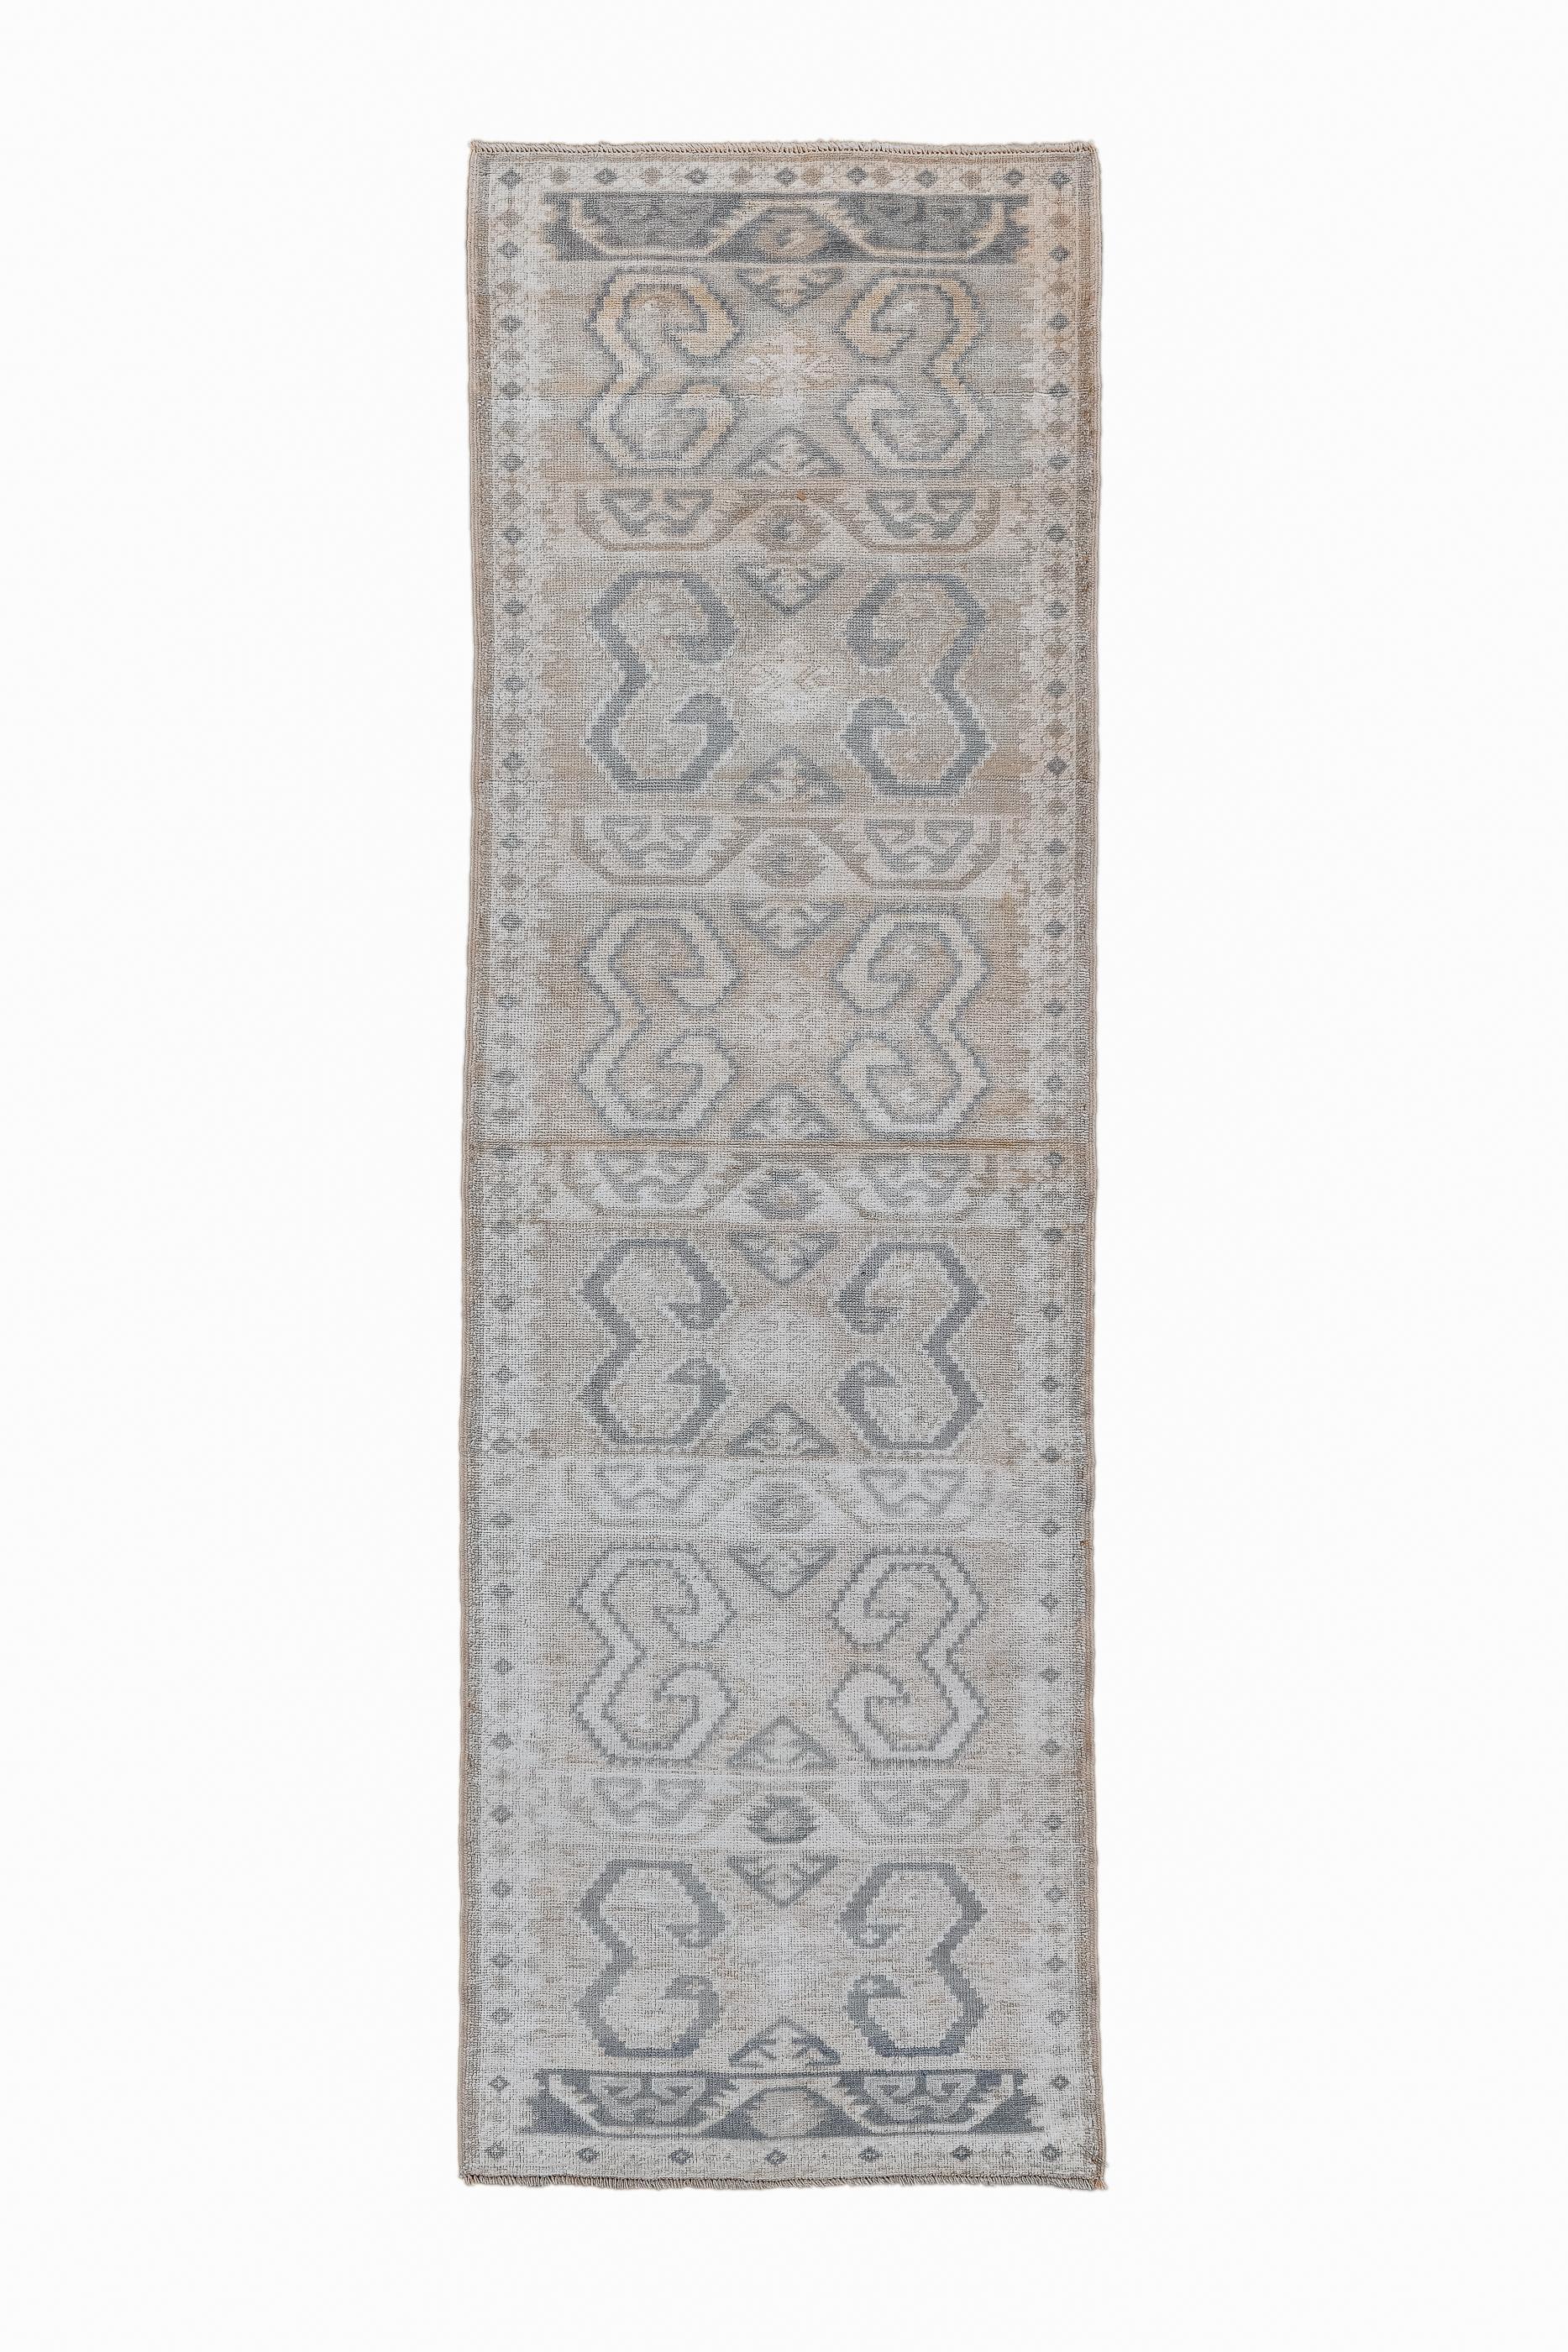 This softly toned little runner shows an eight panel design derived from kilims of bold pairs of rams’ horns. The tips of the volutes have “eyes” suggesting birds. Stepped outlines also refer to kilim sources. Small separator strips with trapezoidal